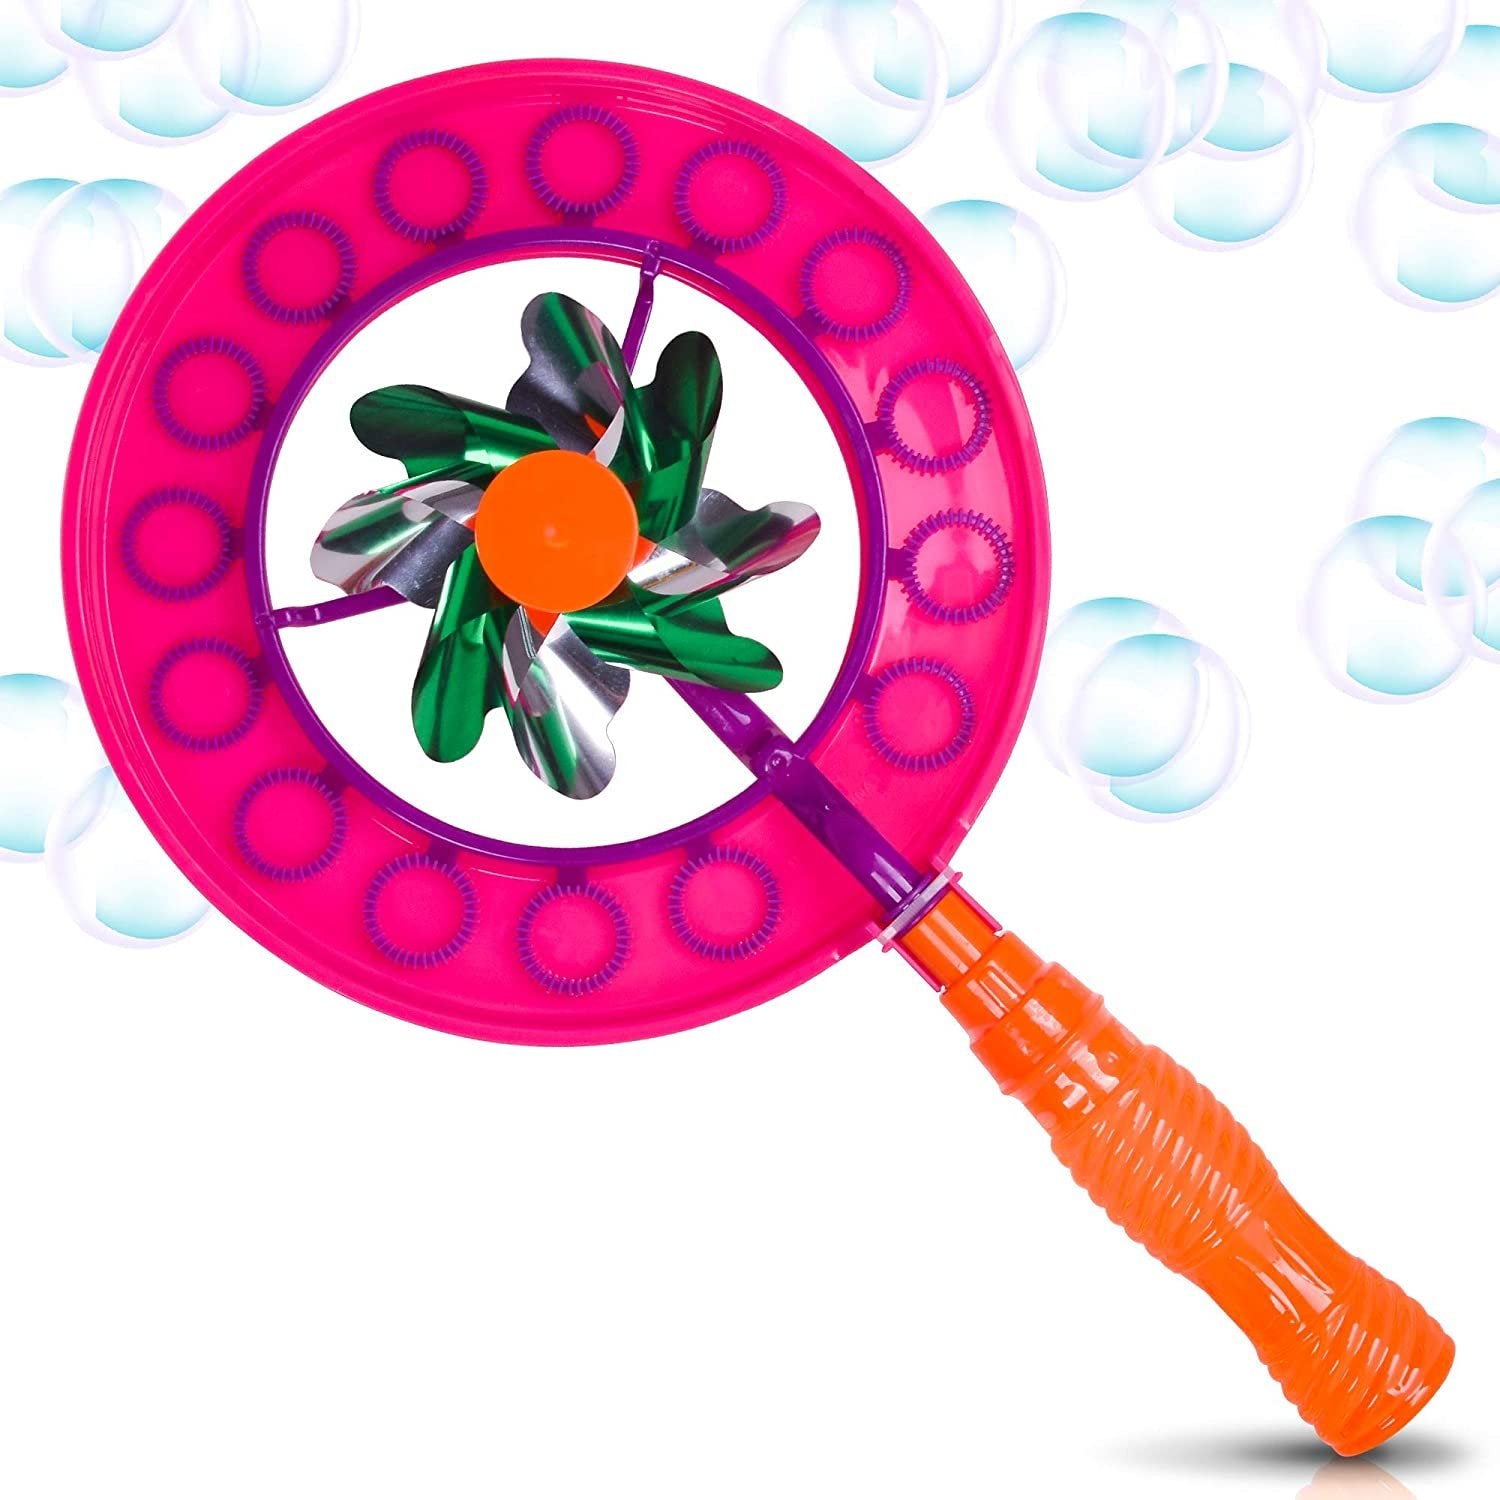 Windmill Bubble Wand, 15.5" Bubble Blower and Pinwheel Spinner for Kids with Solution in Handle, Outdoor Activity for Summer and Backyard Fun, Best Gift for Boys and Girls